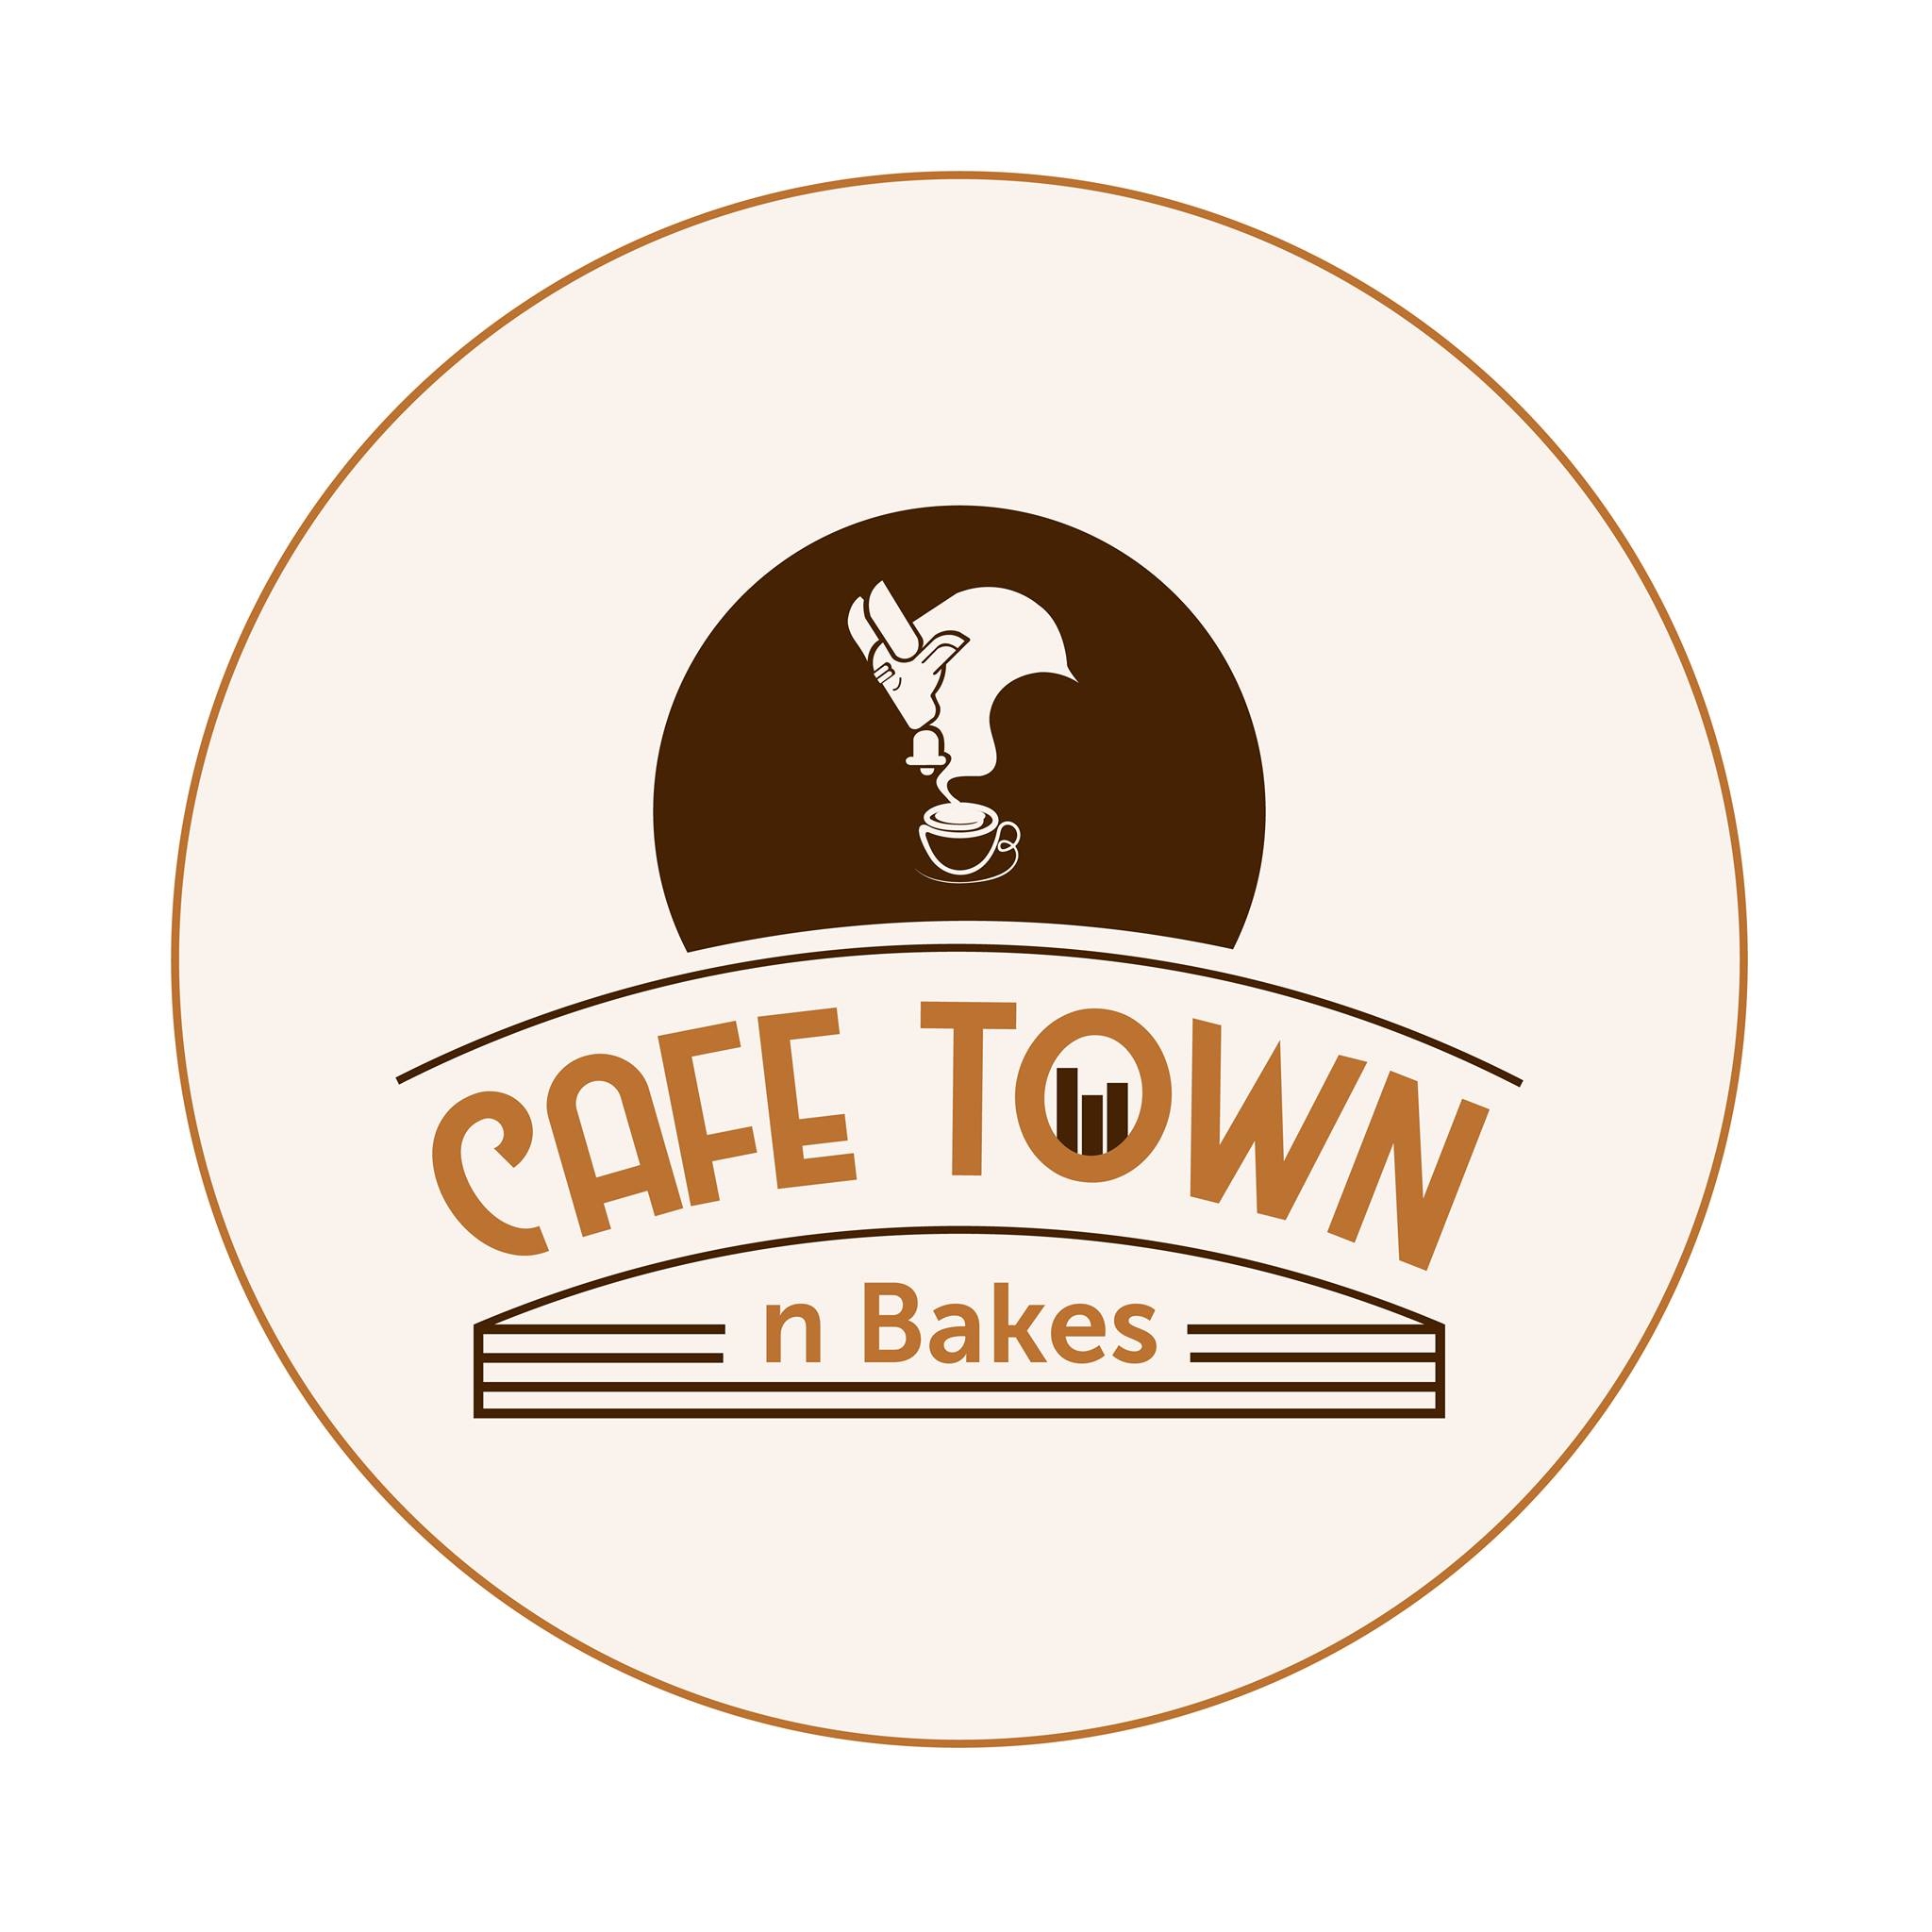 cafe town n bakes